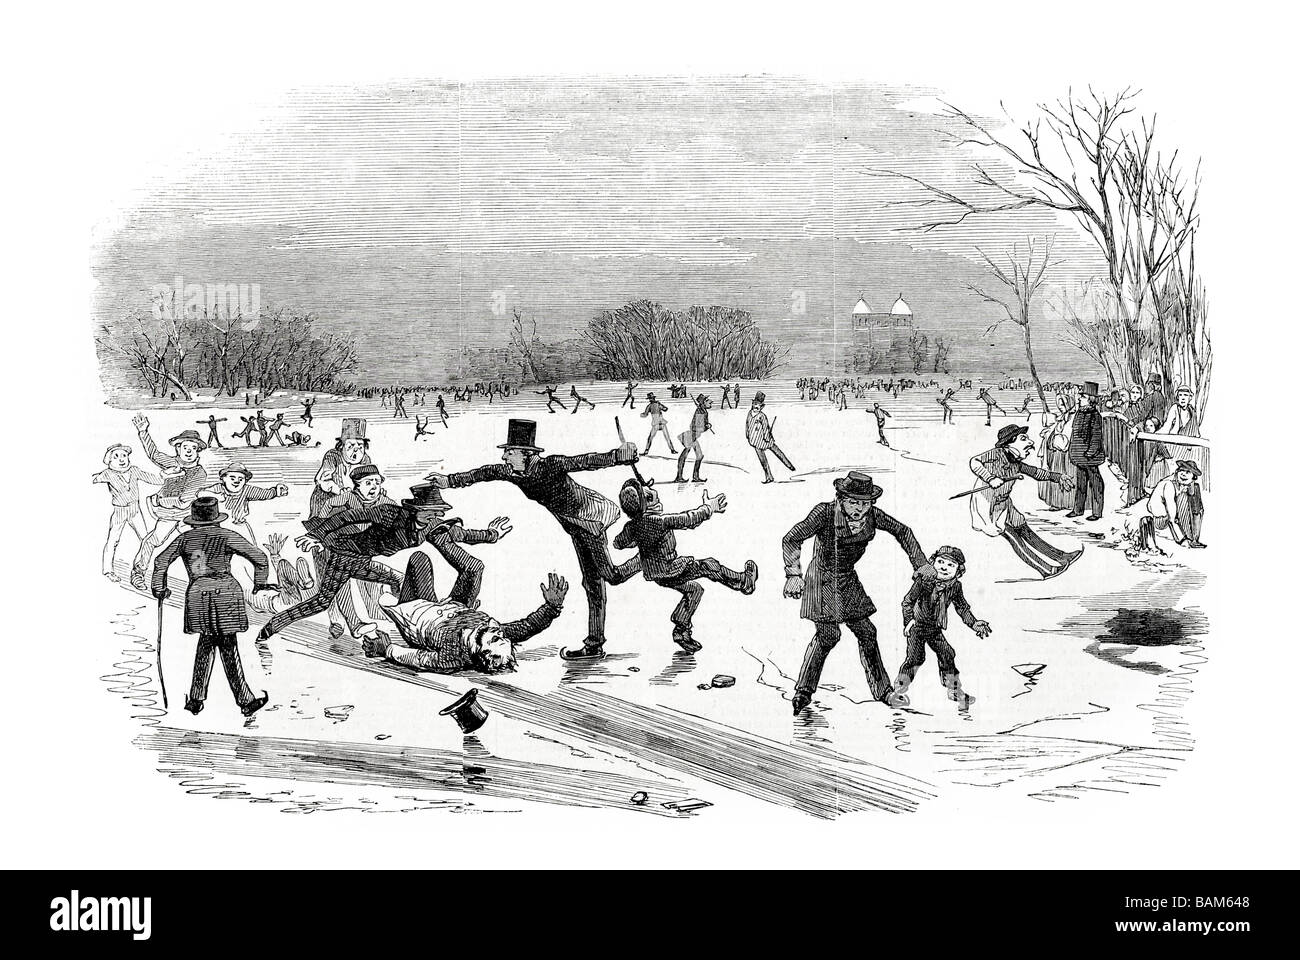 skating in the regent's park frozen chill winter cold water 1854 Stock Photo